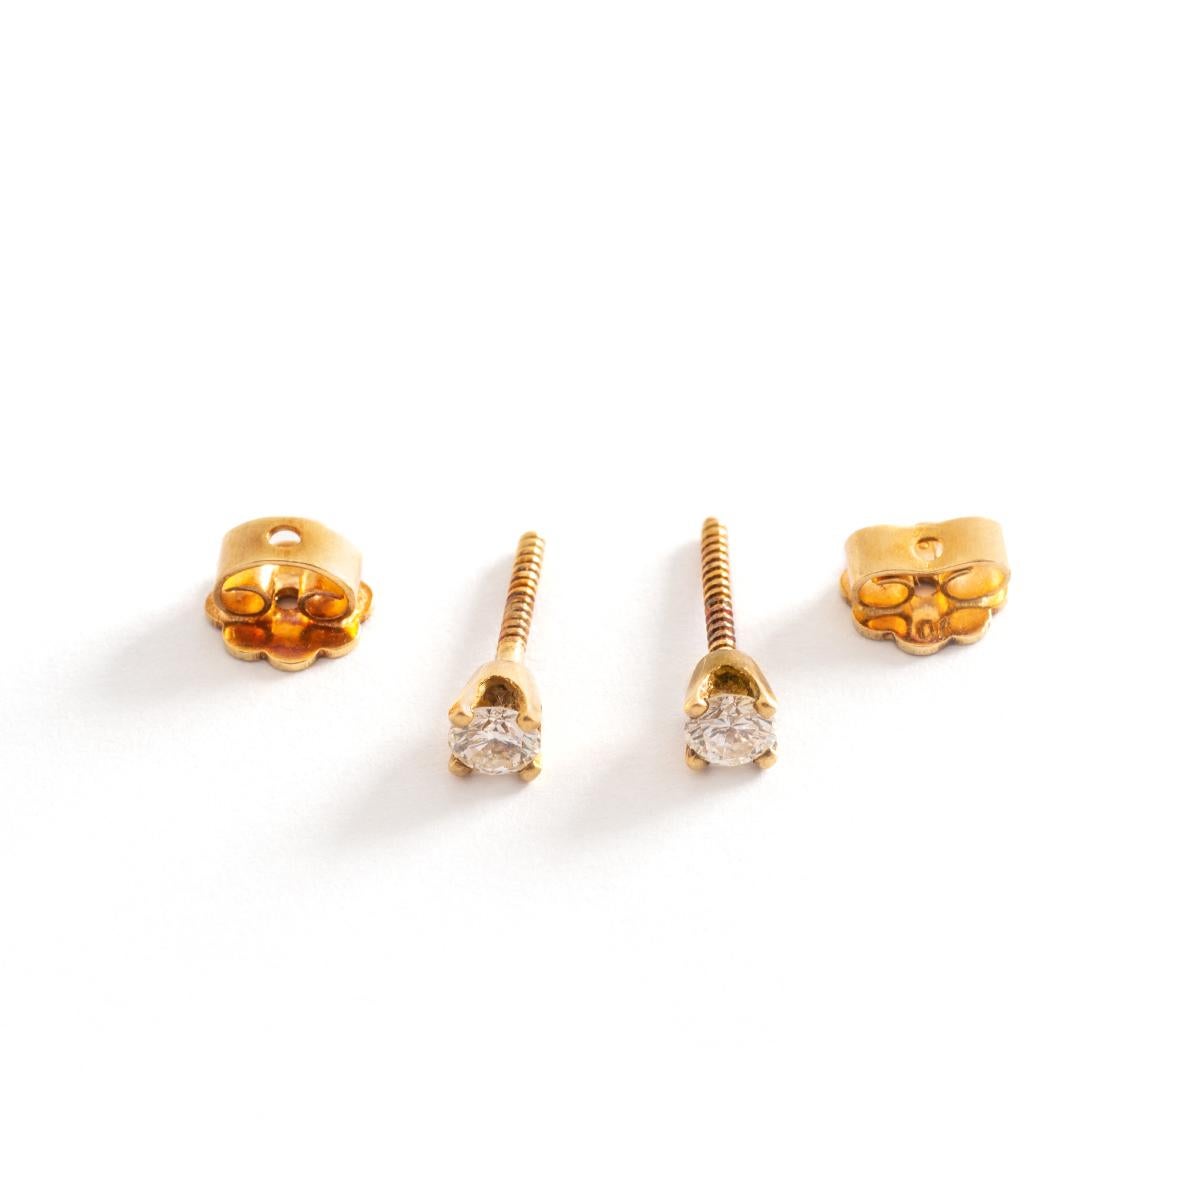 Ear Studs Earrings Diamond claw set on Yellow Gold.
Diameter: 0.40 centimeter.
2 round cut diamonds: 3.22 millimeters each.
Approximately 0.24 carat total.
Gross weight: 1.17 grams.